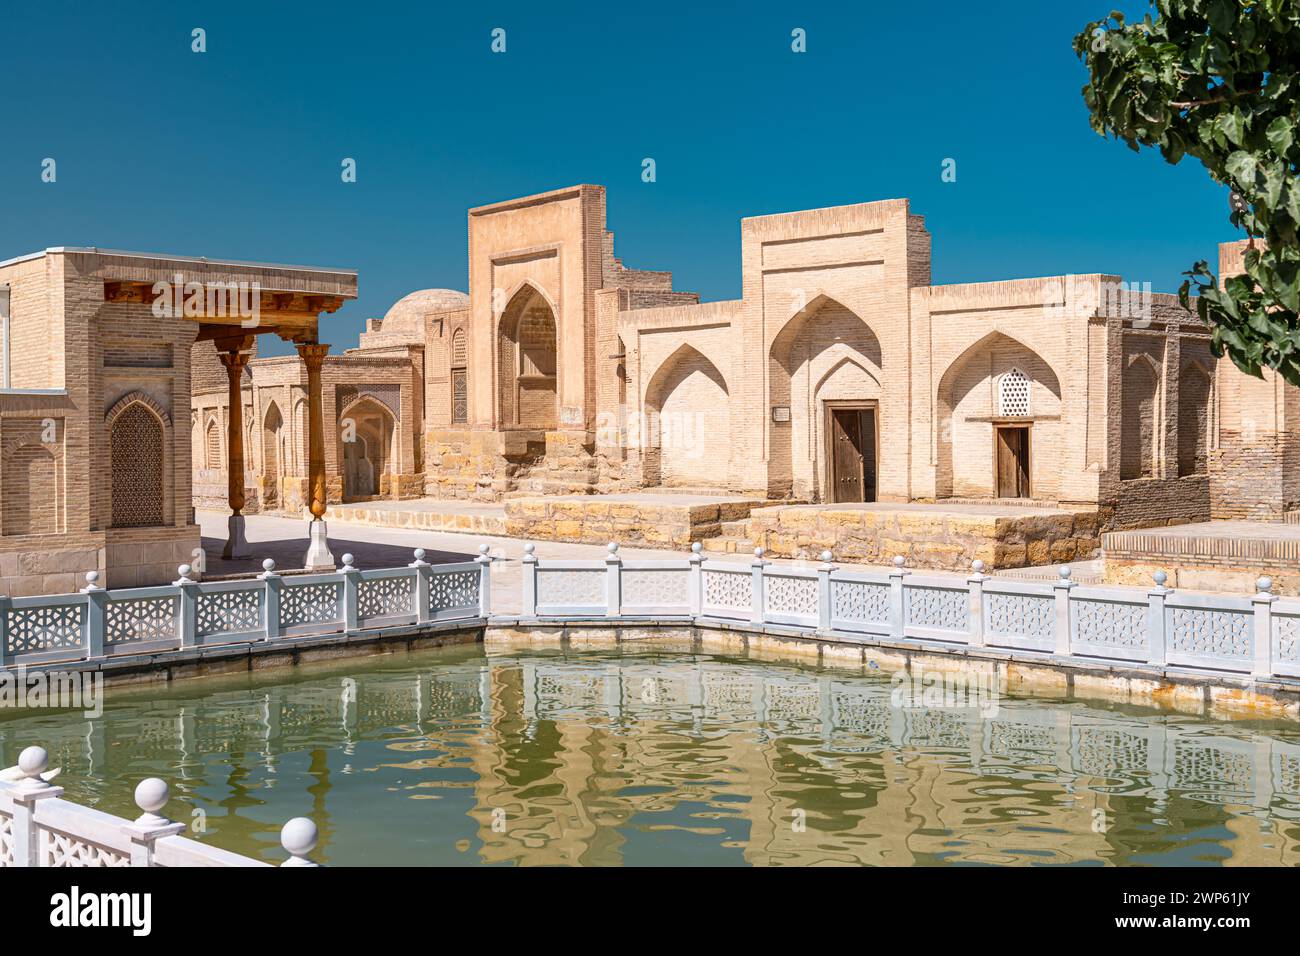 Chor-Bakr situated on the outskirts of Bukhara the burial place of Abu-Bakr-Said said to be a descendant of the prophet Muhammad in Bukhara, Samarkand Stock Photo